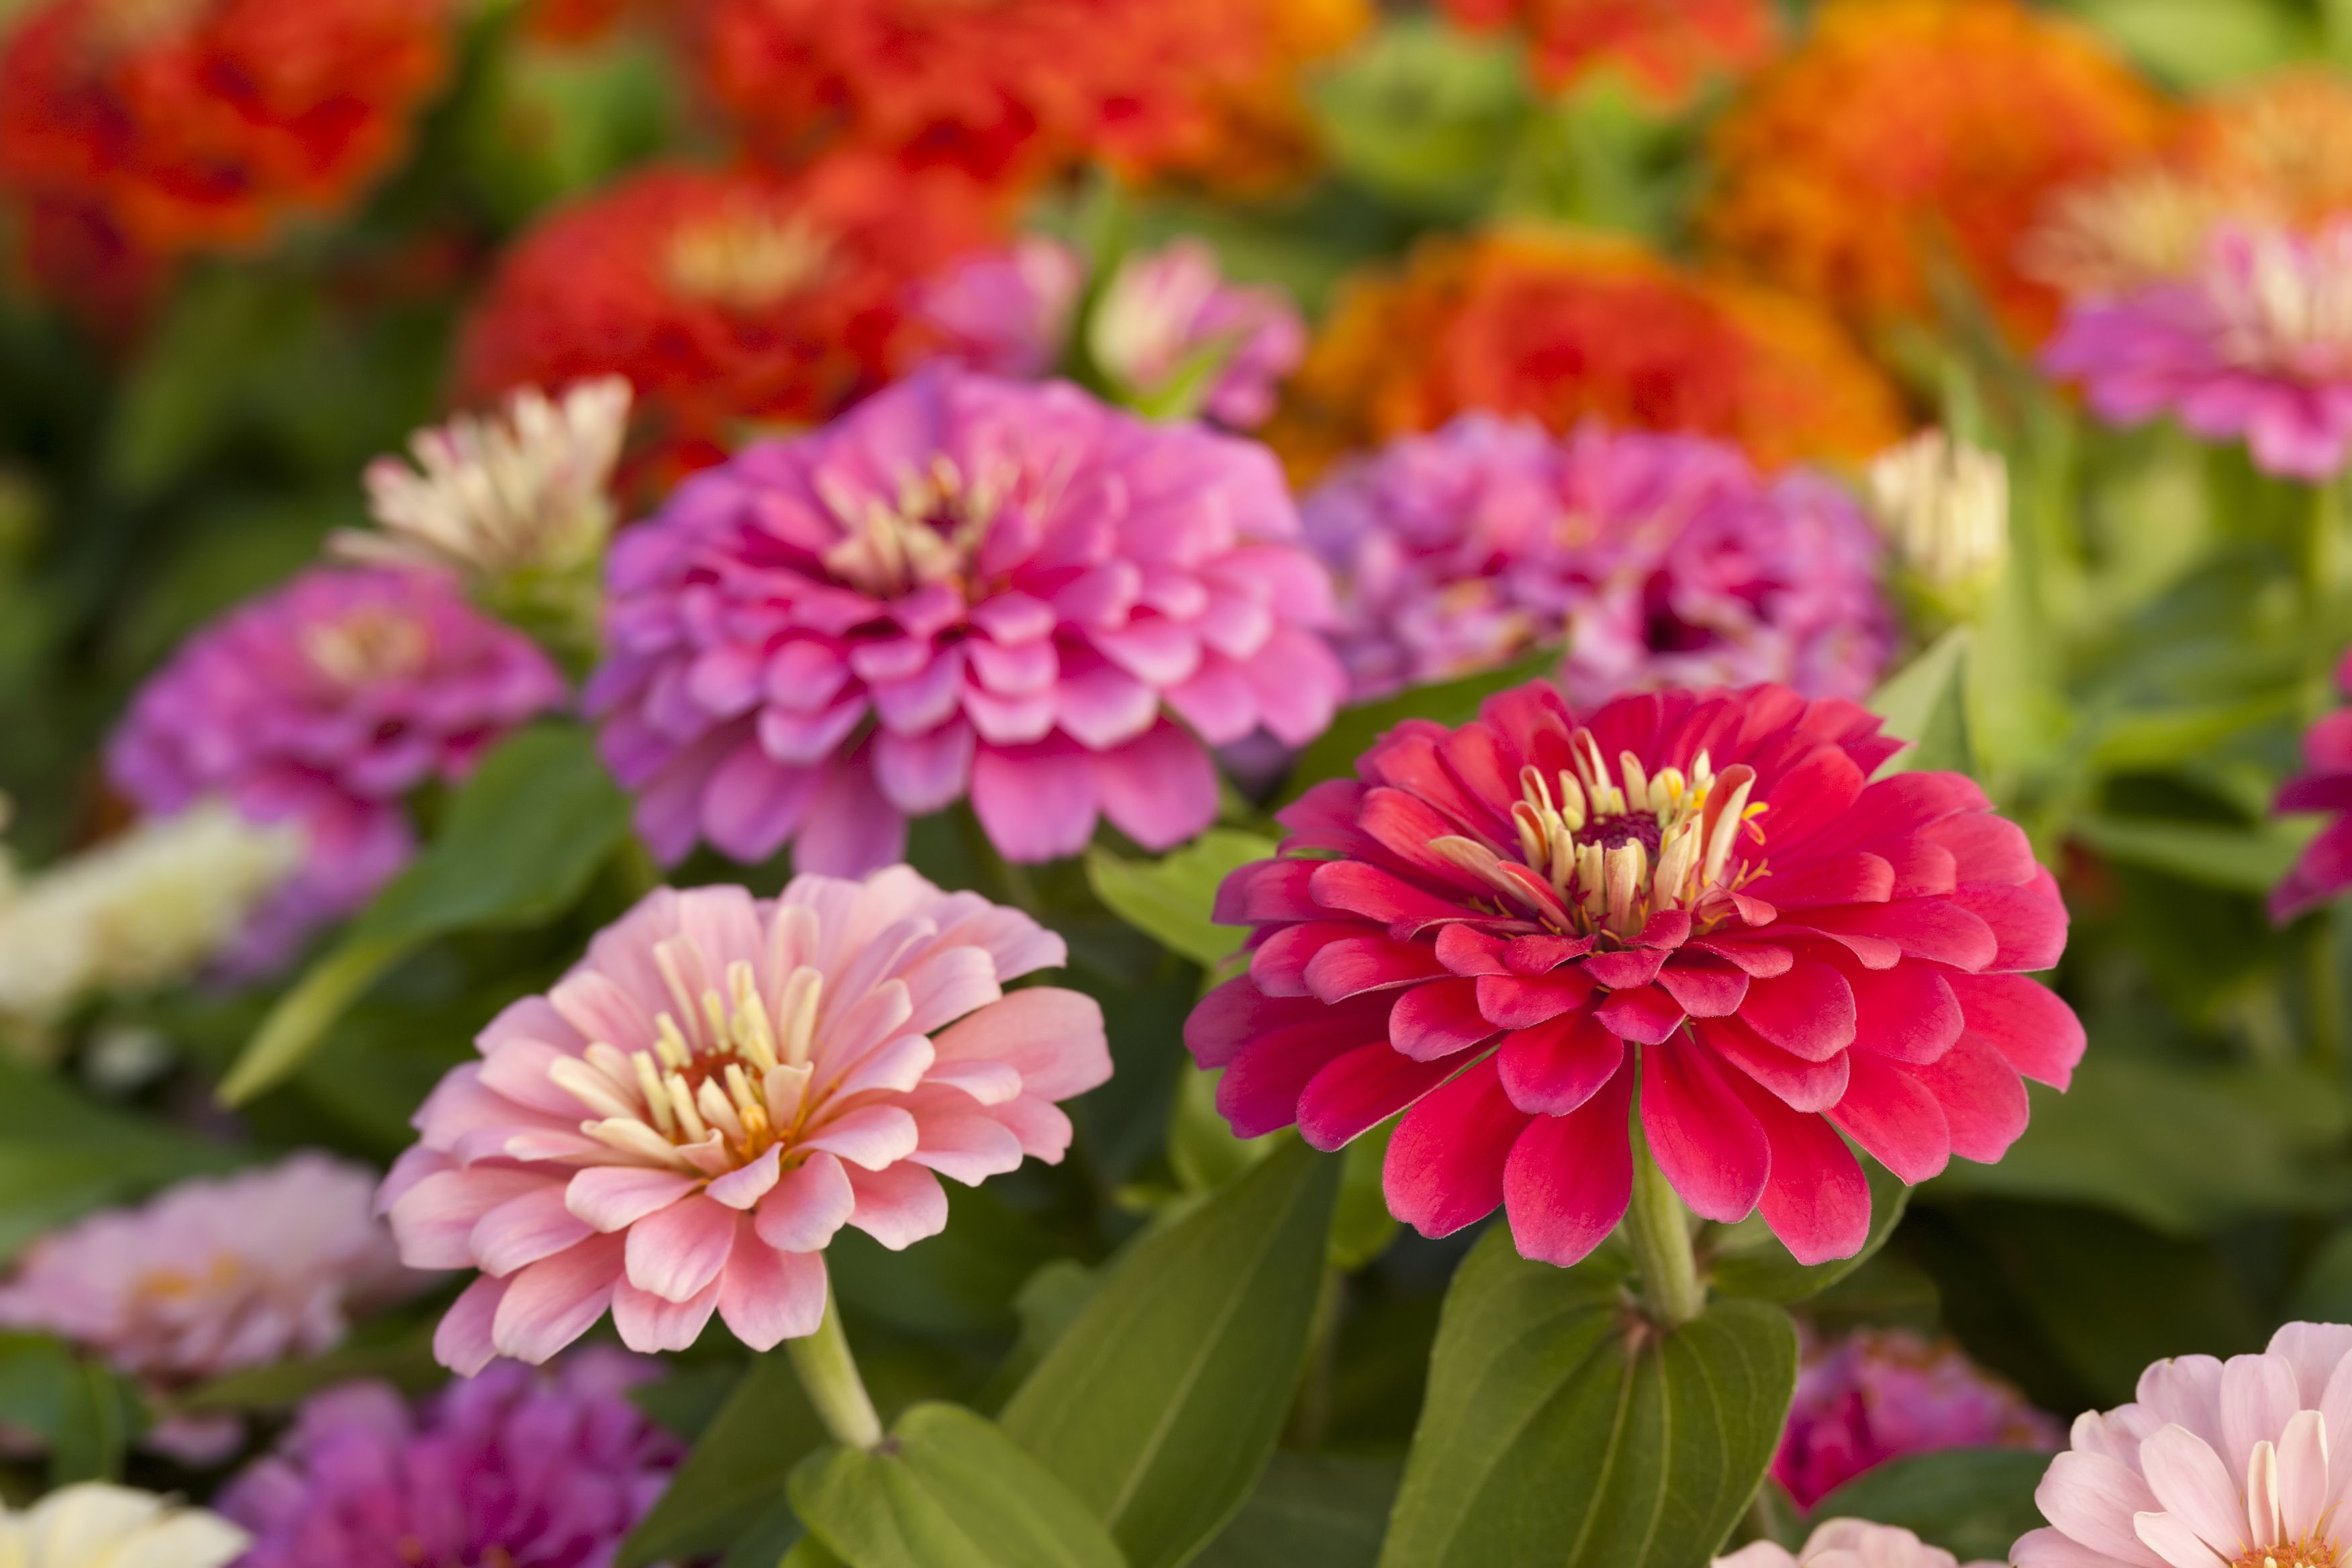 Image of Zinnia plant that lasts all summer